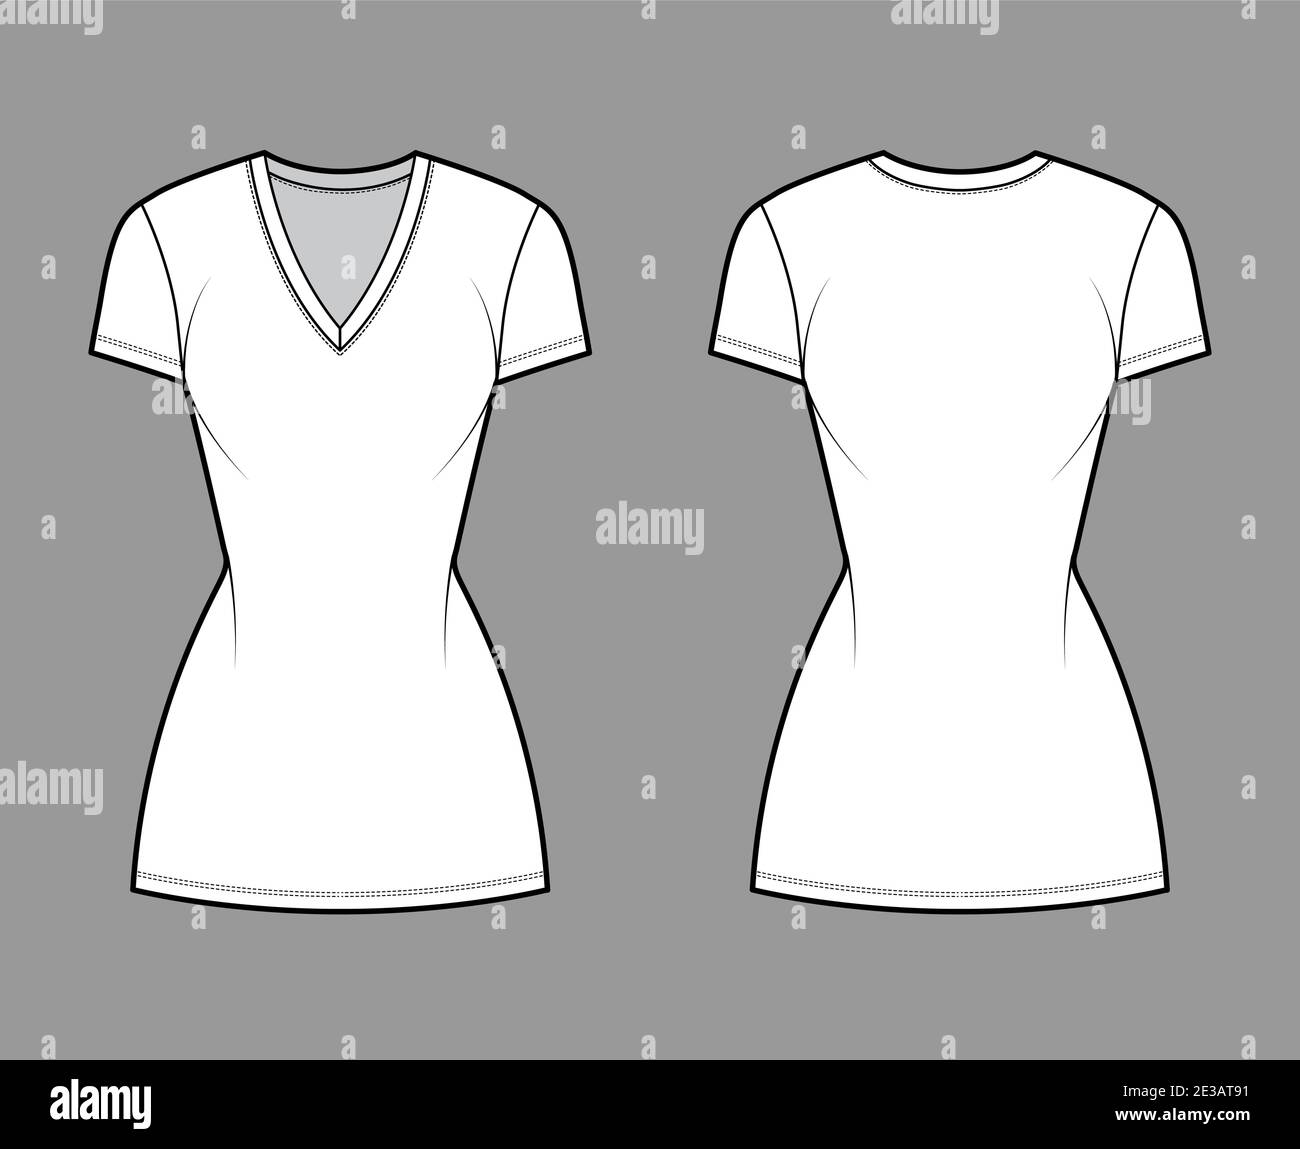 T-shirt dress technical fashion illustration with V-neck, short sleeves, mini length, fitted body, Pencil fullness. Flat apparel template front, back, white color. Women, men, unisex CAD mockup Stock Vector